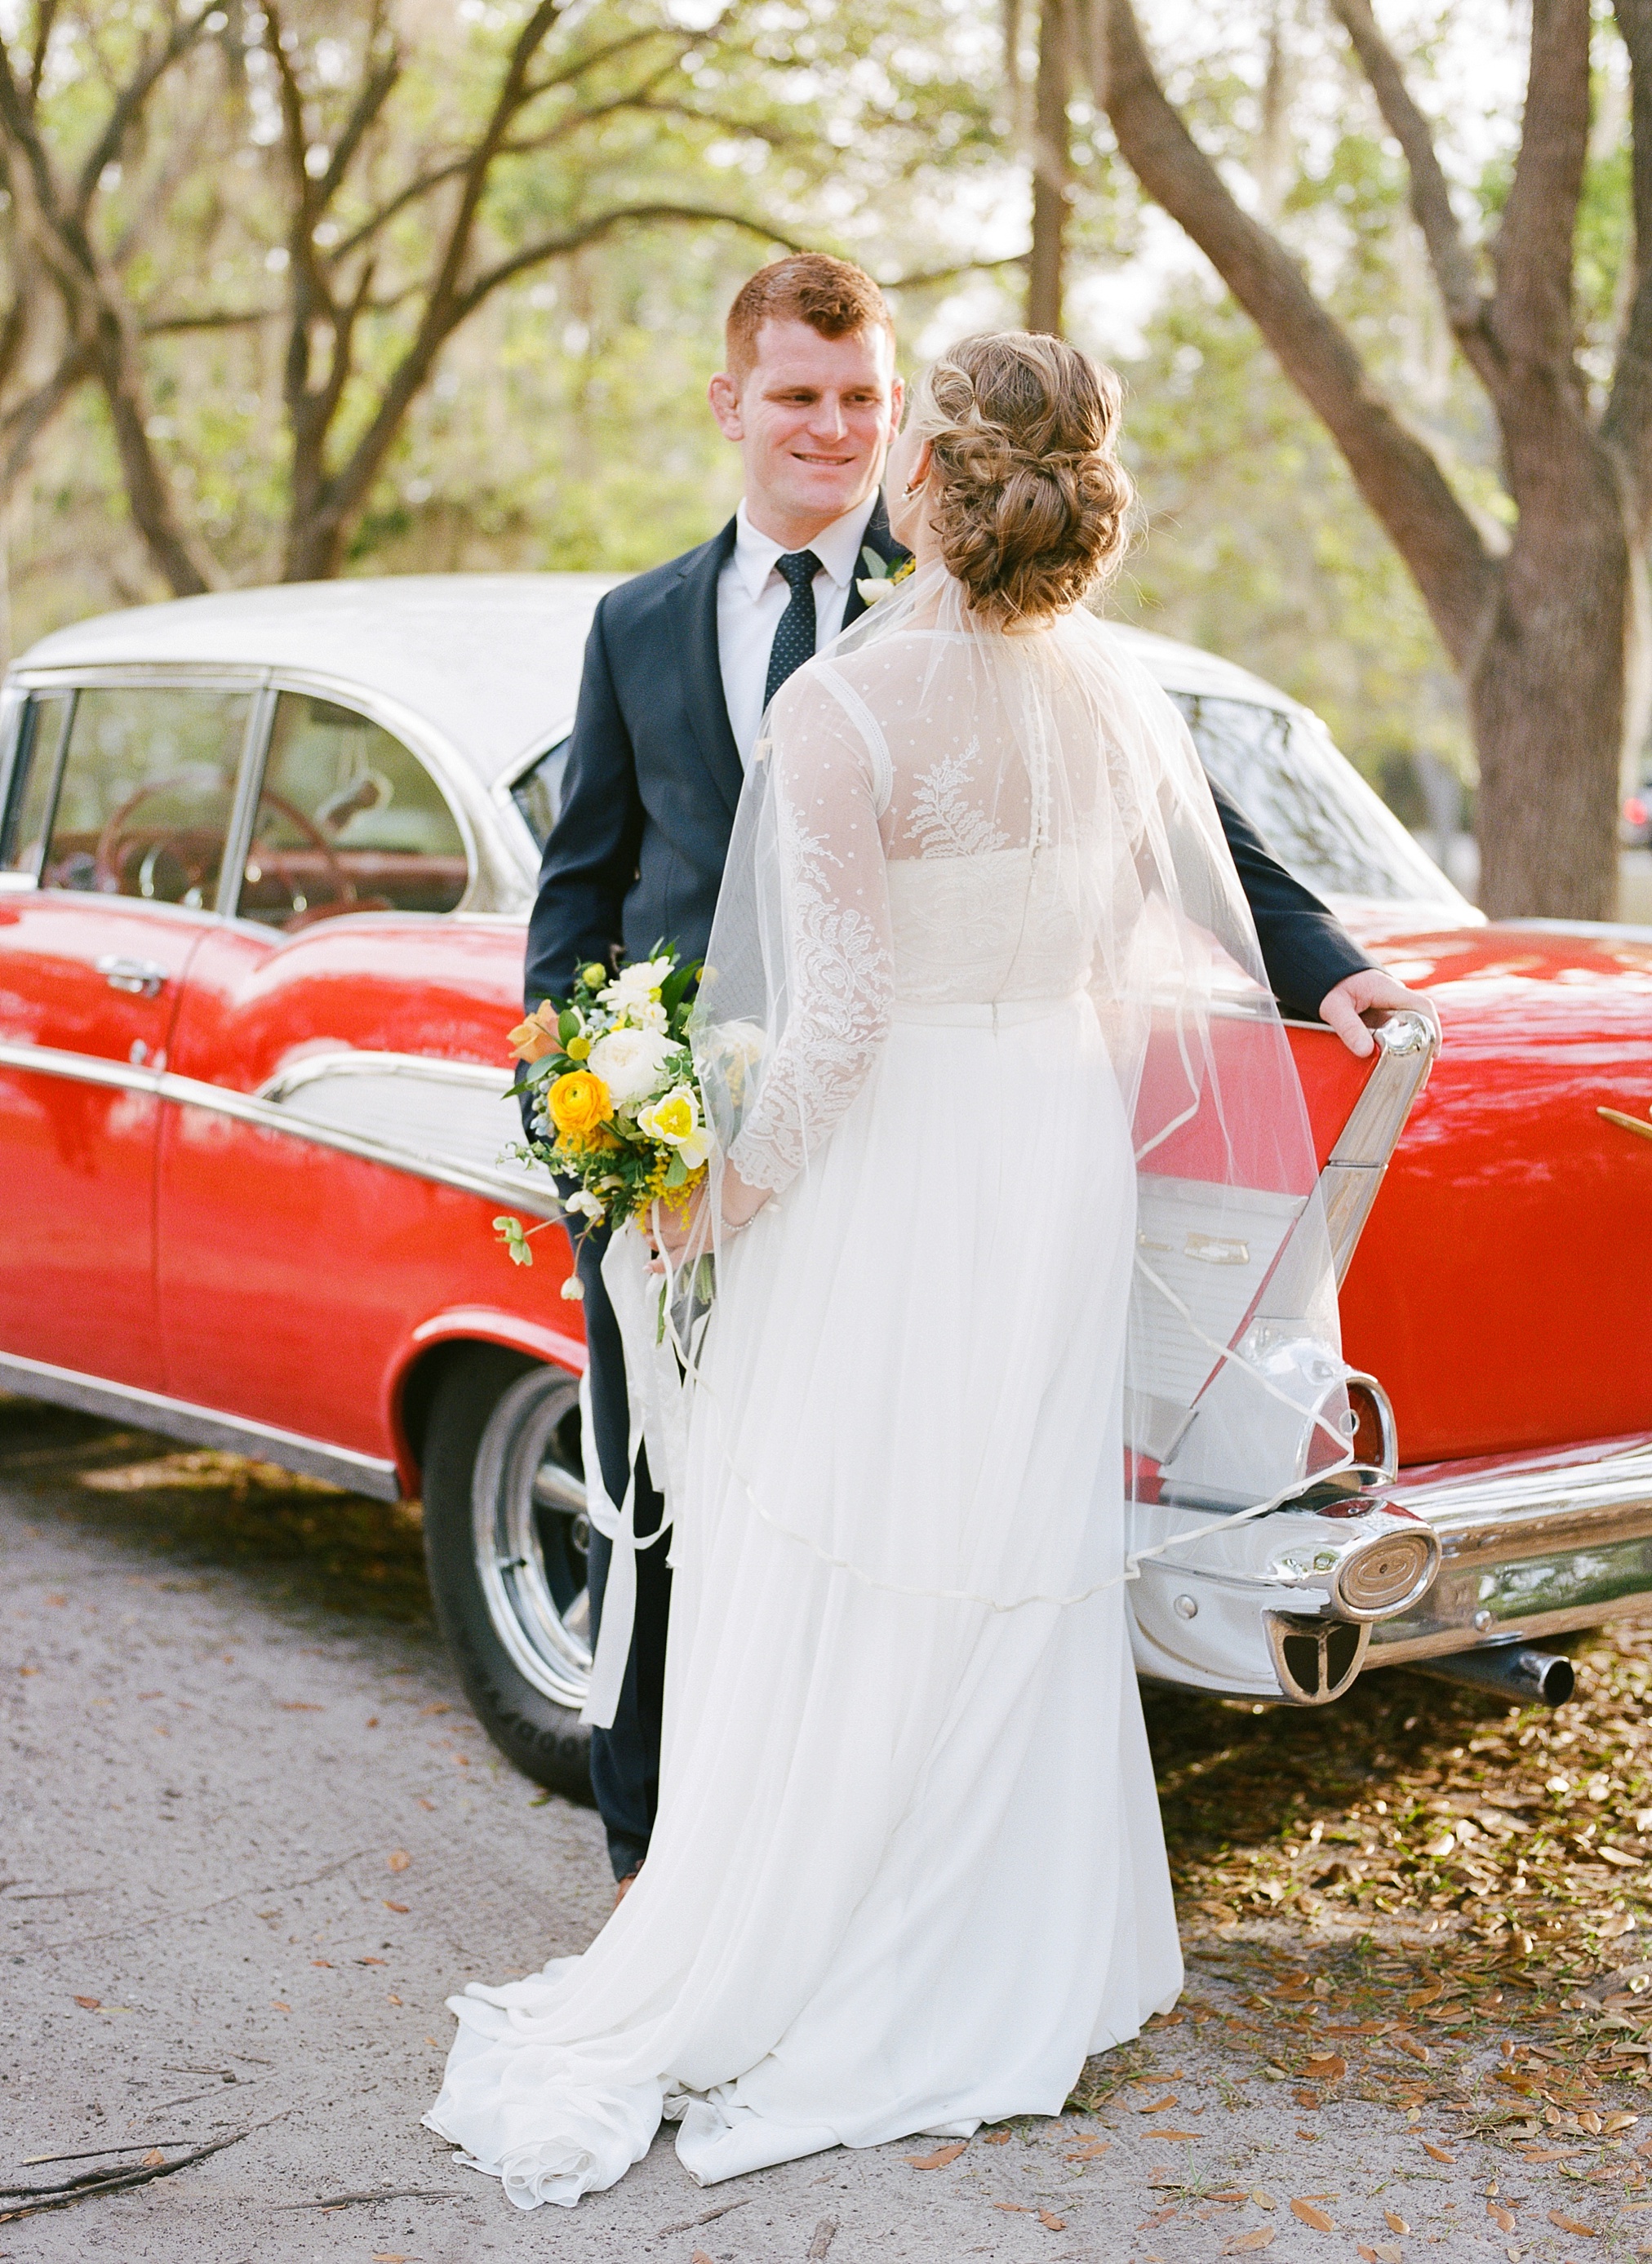 Chevy Bel Air wedding photo with bride and groom in Lakeland, Florida